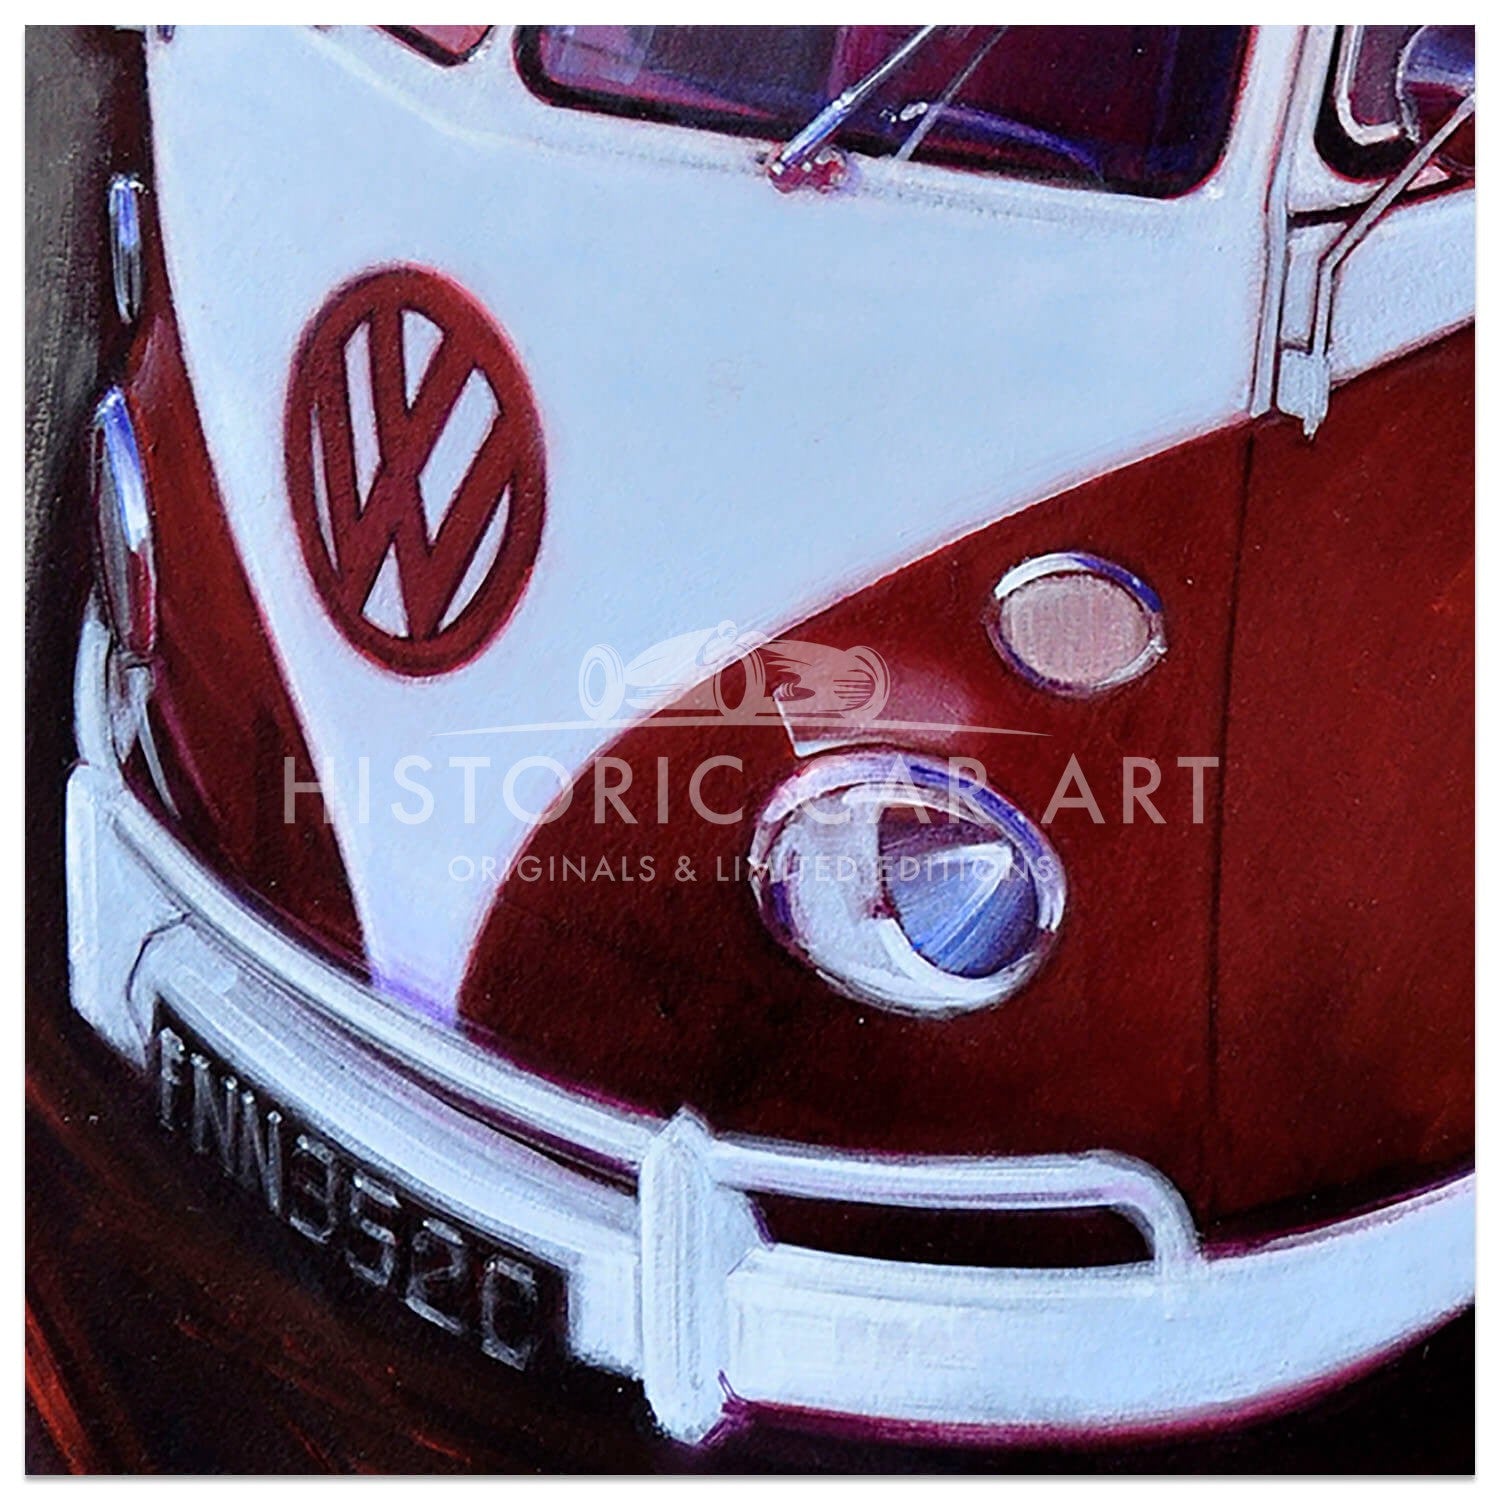 Away from it all | Type 2 VW | Artwork